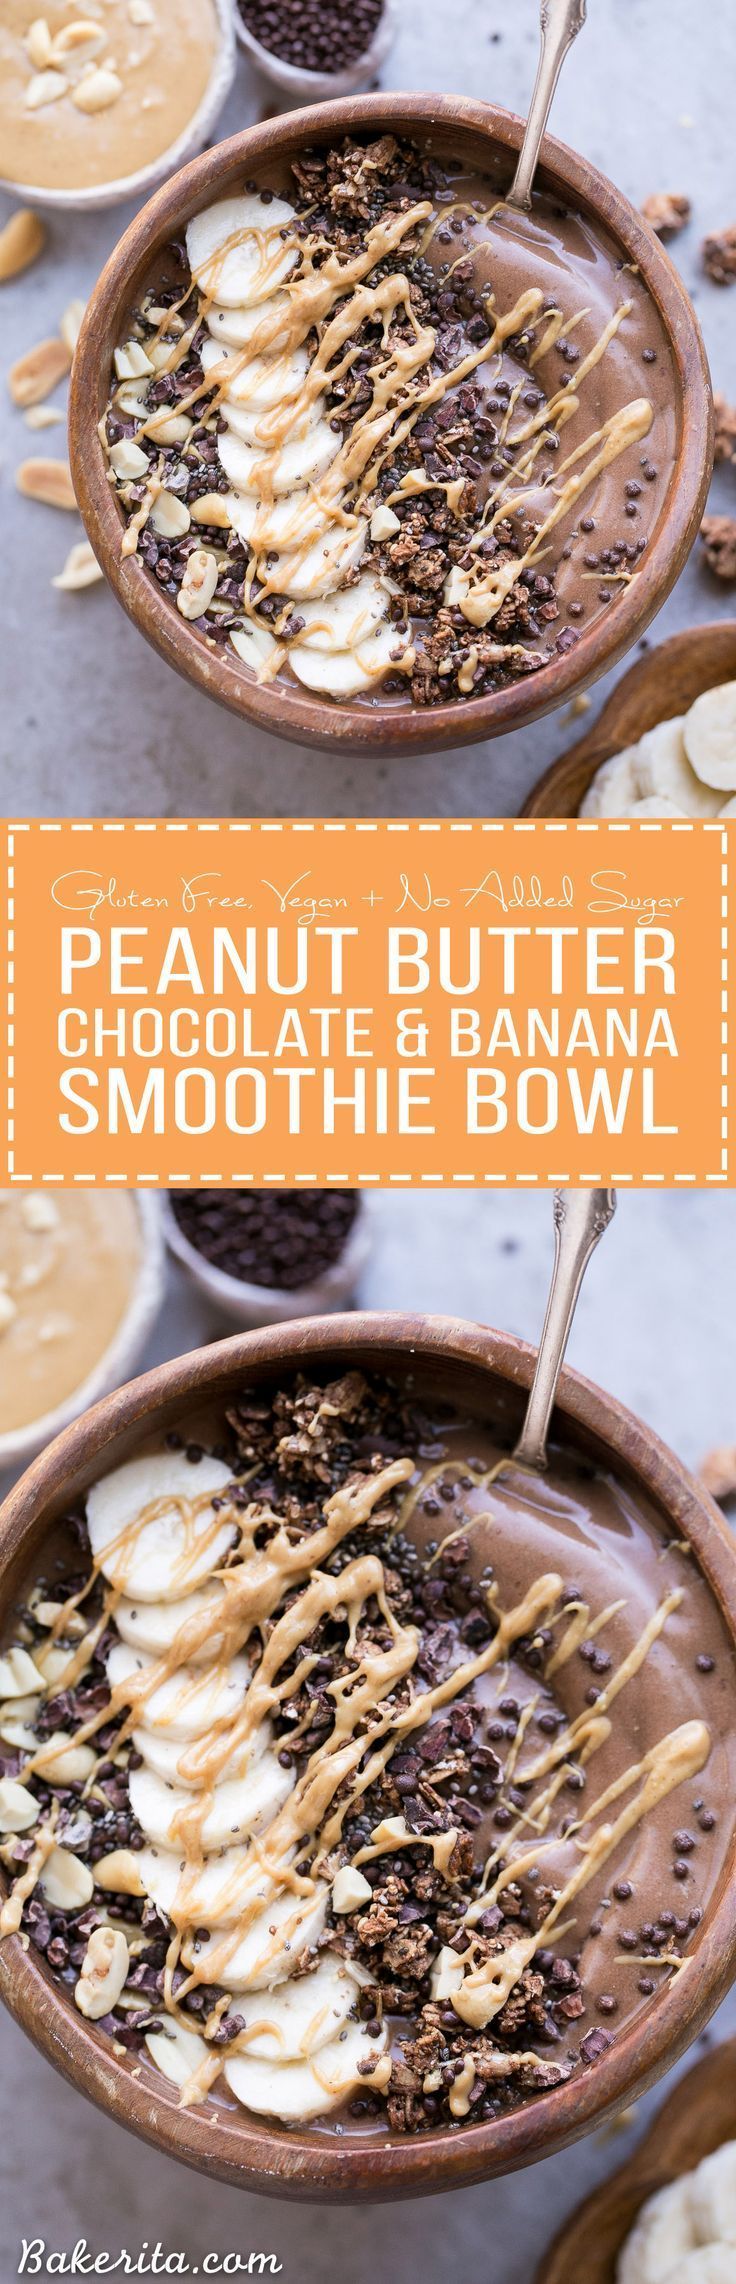 This Chocolate Peanut Butter Banana Smoothie Bowl tastes like a peanut butter cup, but its actually a filling, superfood-packed